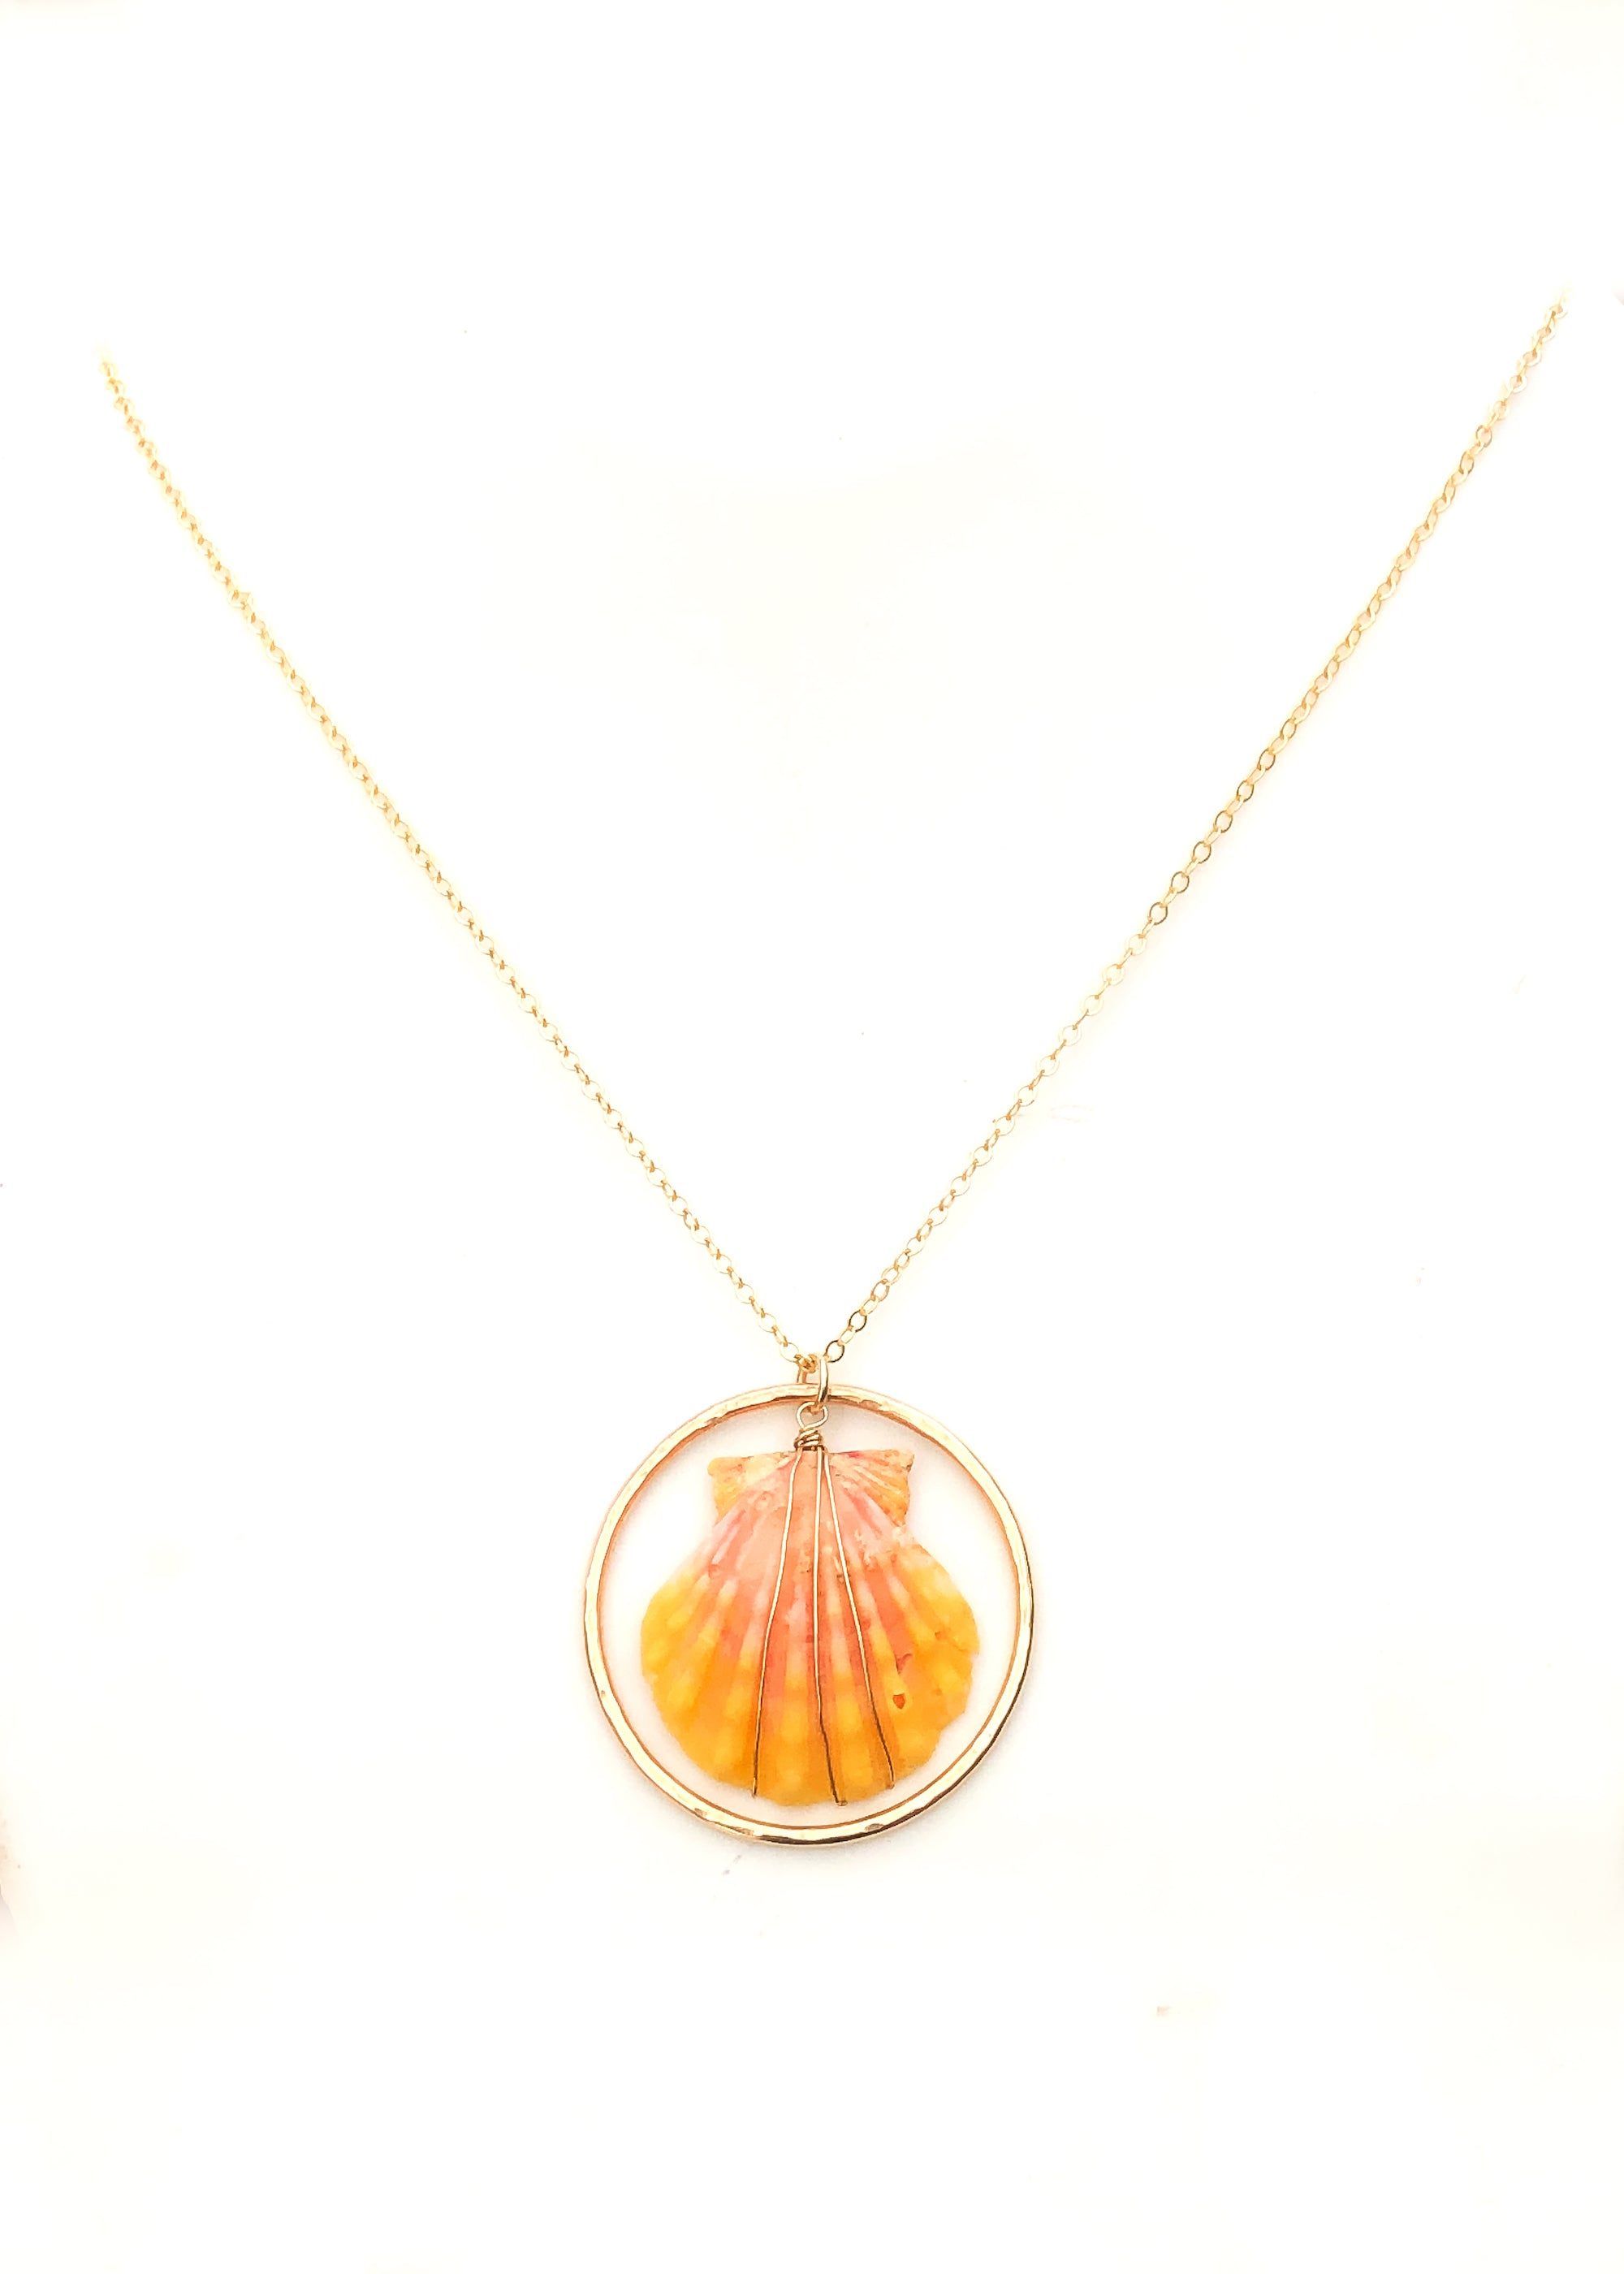 Sustainable Jewelry With Shell